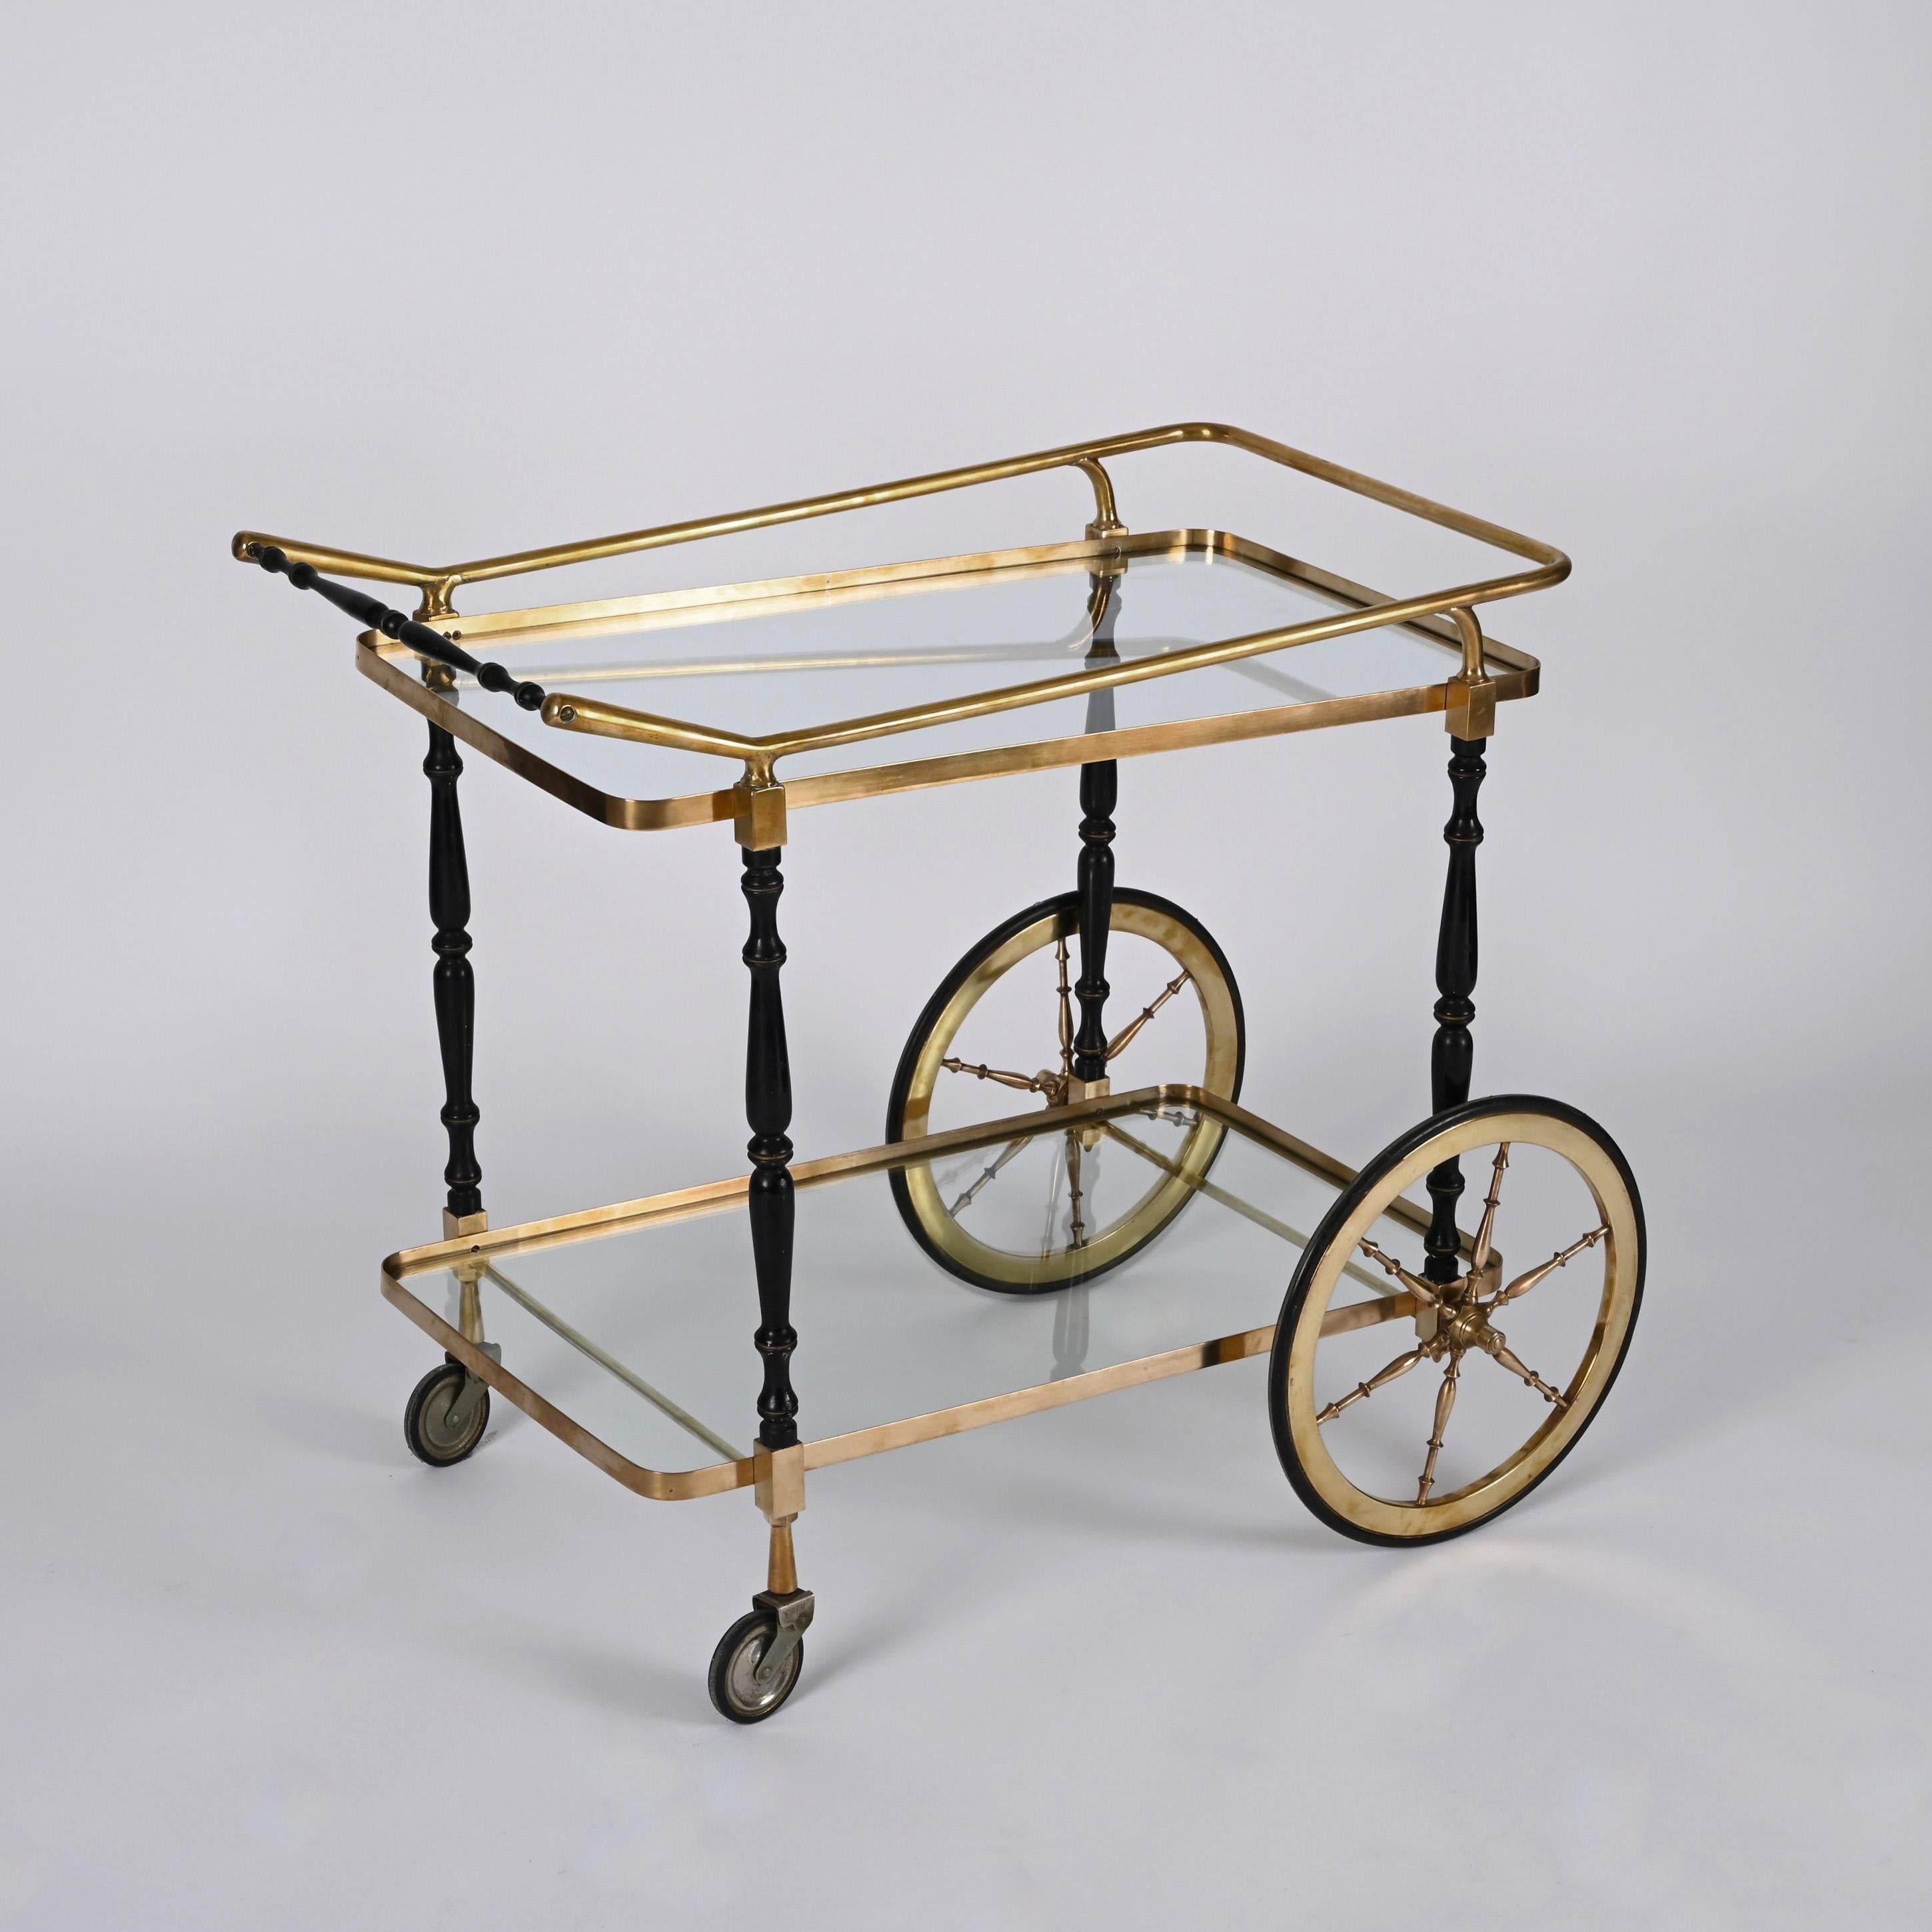 Midcentury Cesare Lacca Brass and Black Lacquer Wood Italian Bar Cart, 1950s For Sale 3